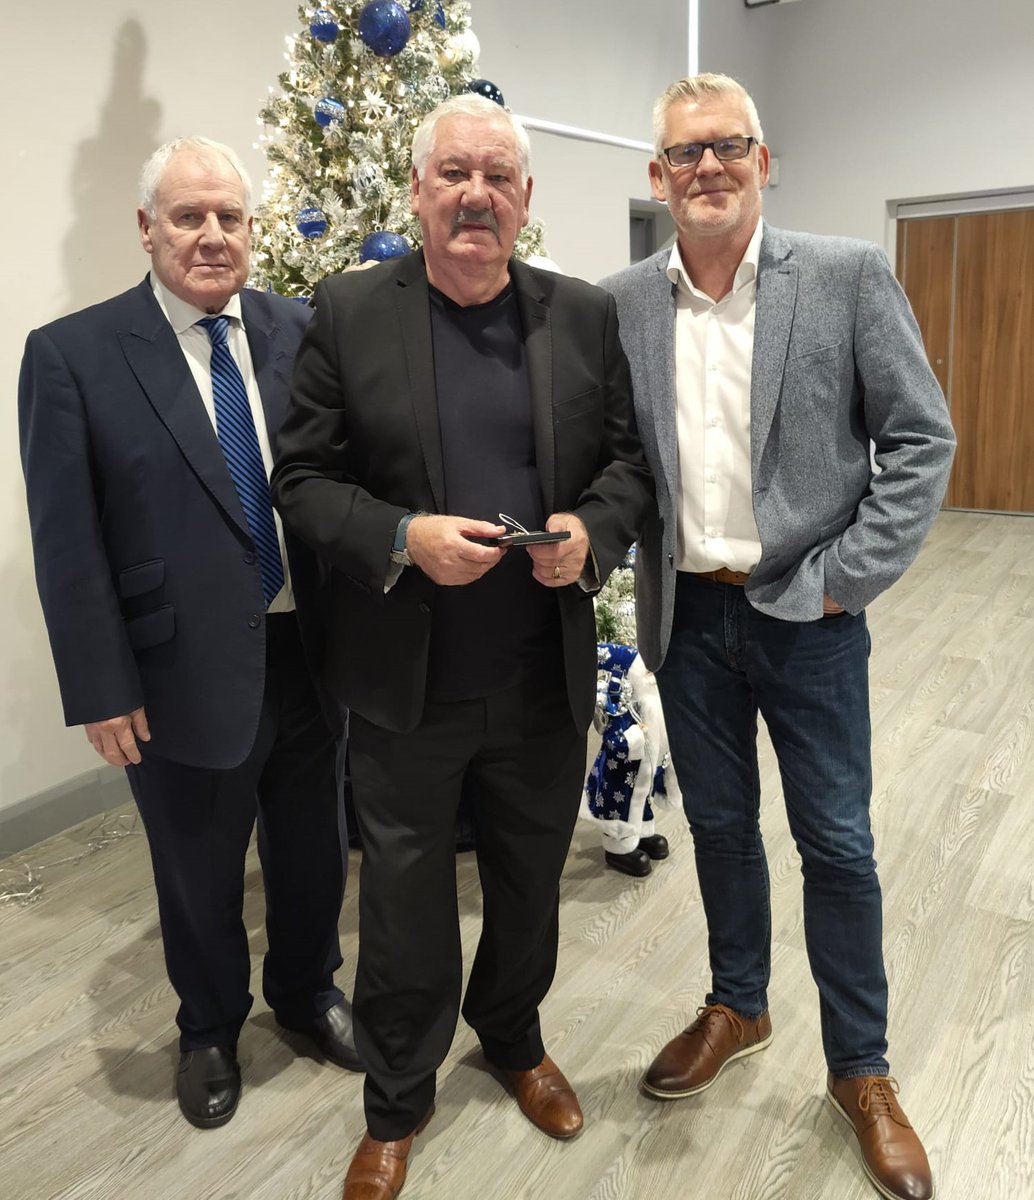 Lovely to surprise Roger Kenyon with his 1969/70 League Championship medal at the @EFCFPF Christmas Lunch. Presented to him by his great pal Joe Royle